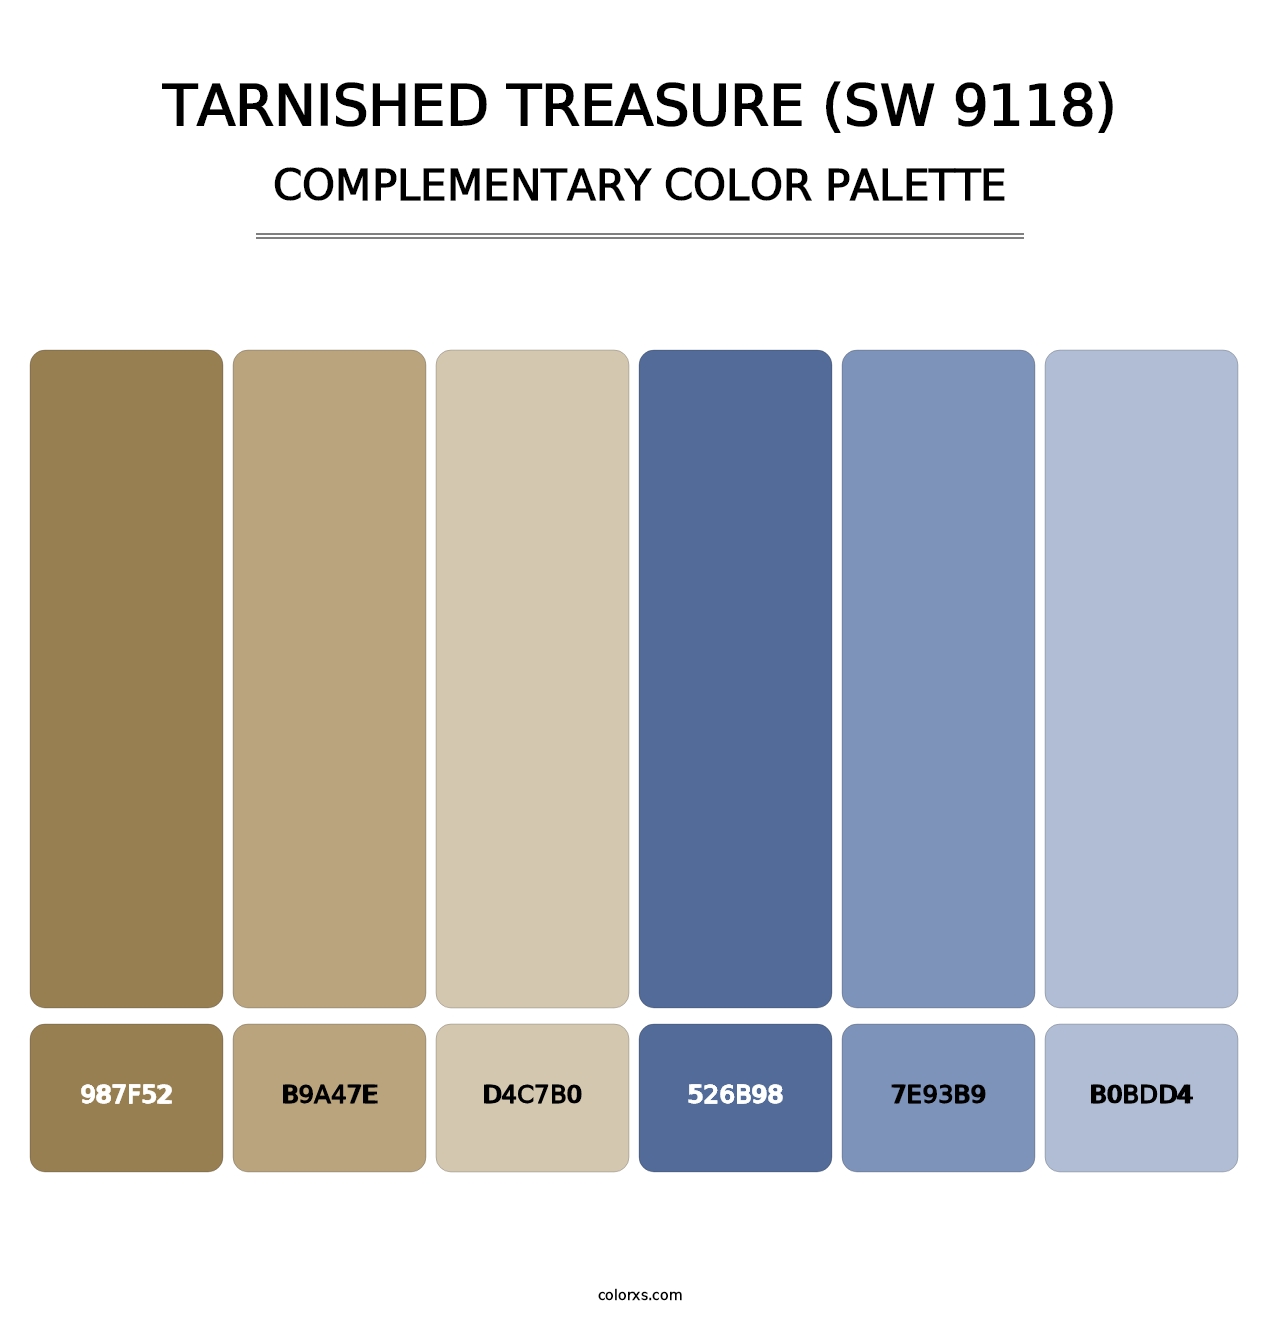 Tarnished Treasure (SW 9118) - Complementary Color Palette